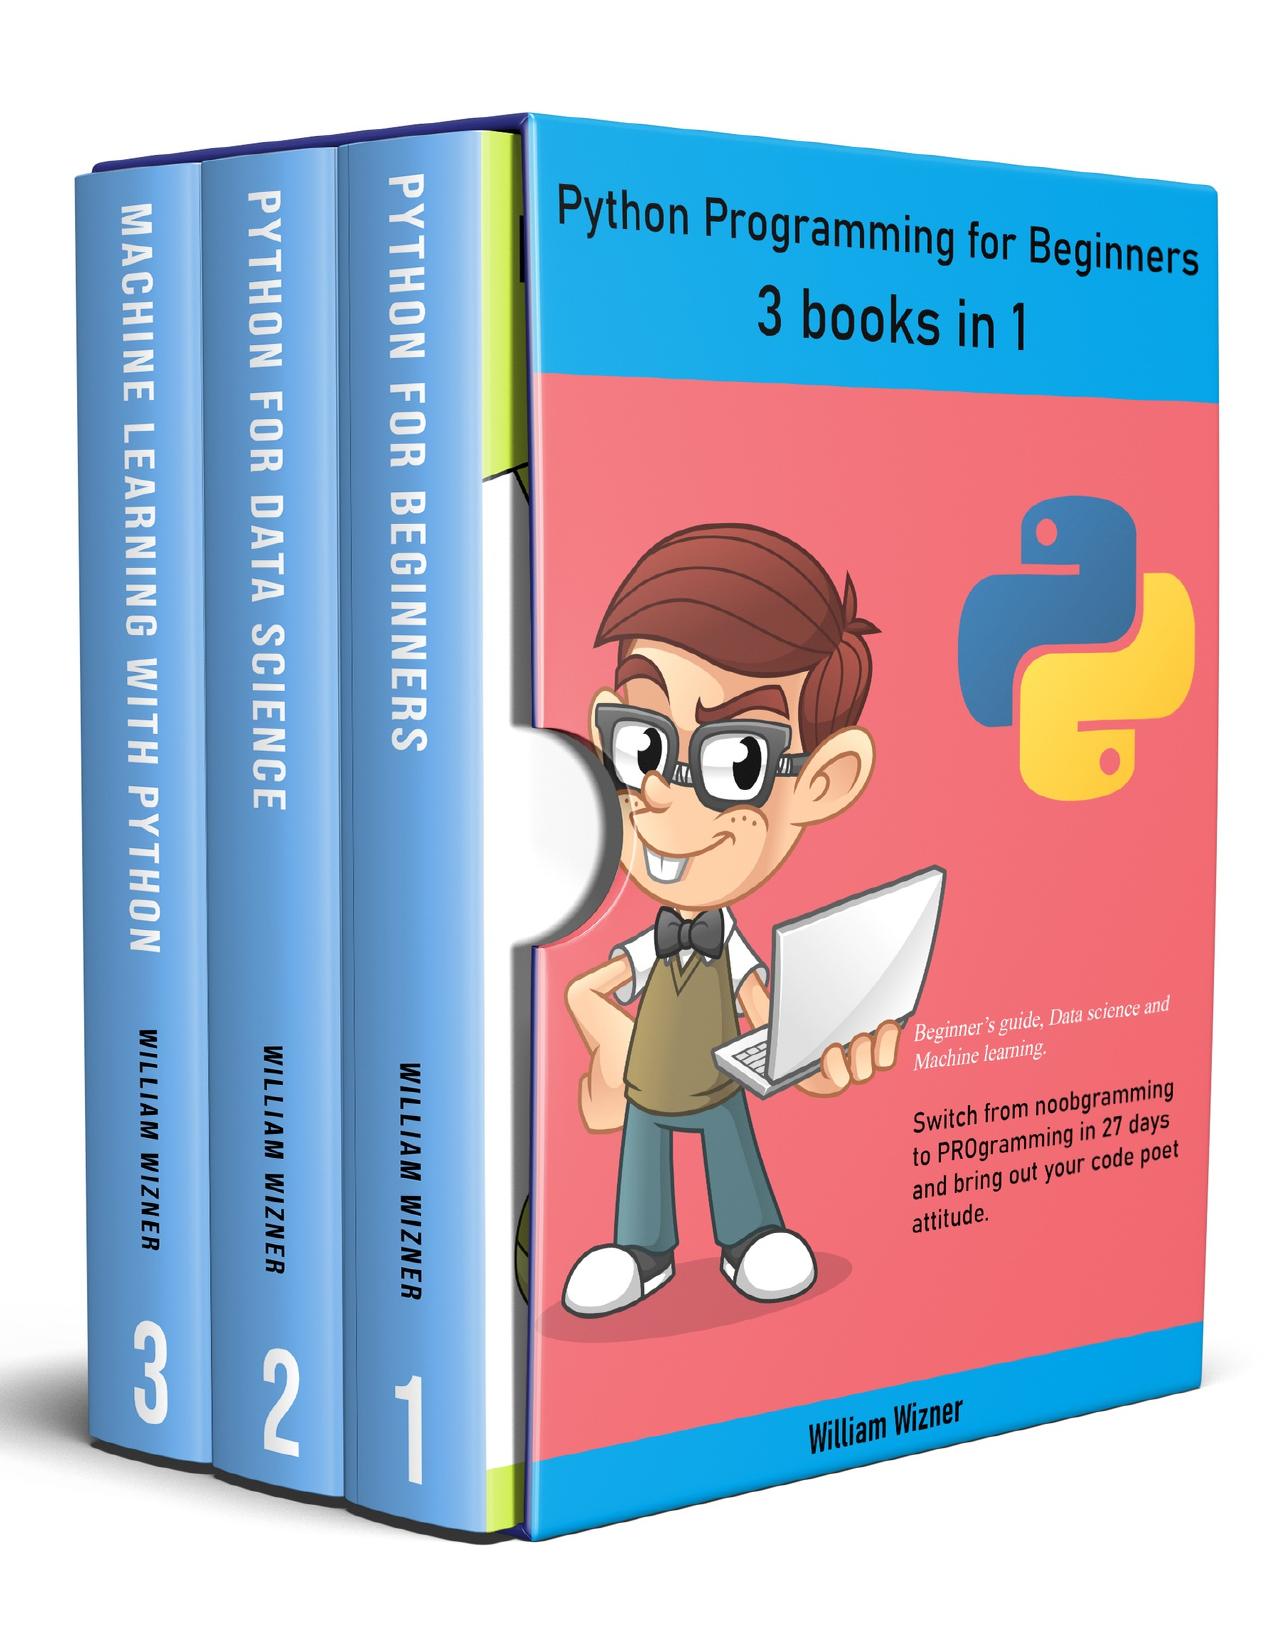 Python programming for beginners: 3 books in 1: Beginner's guide, Data science and Machine learning